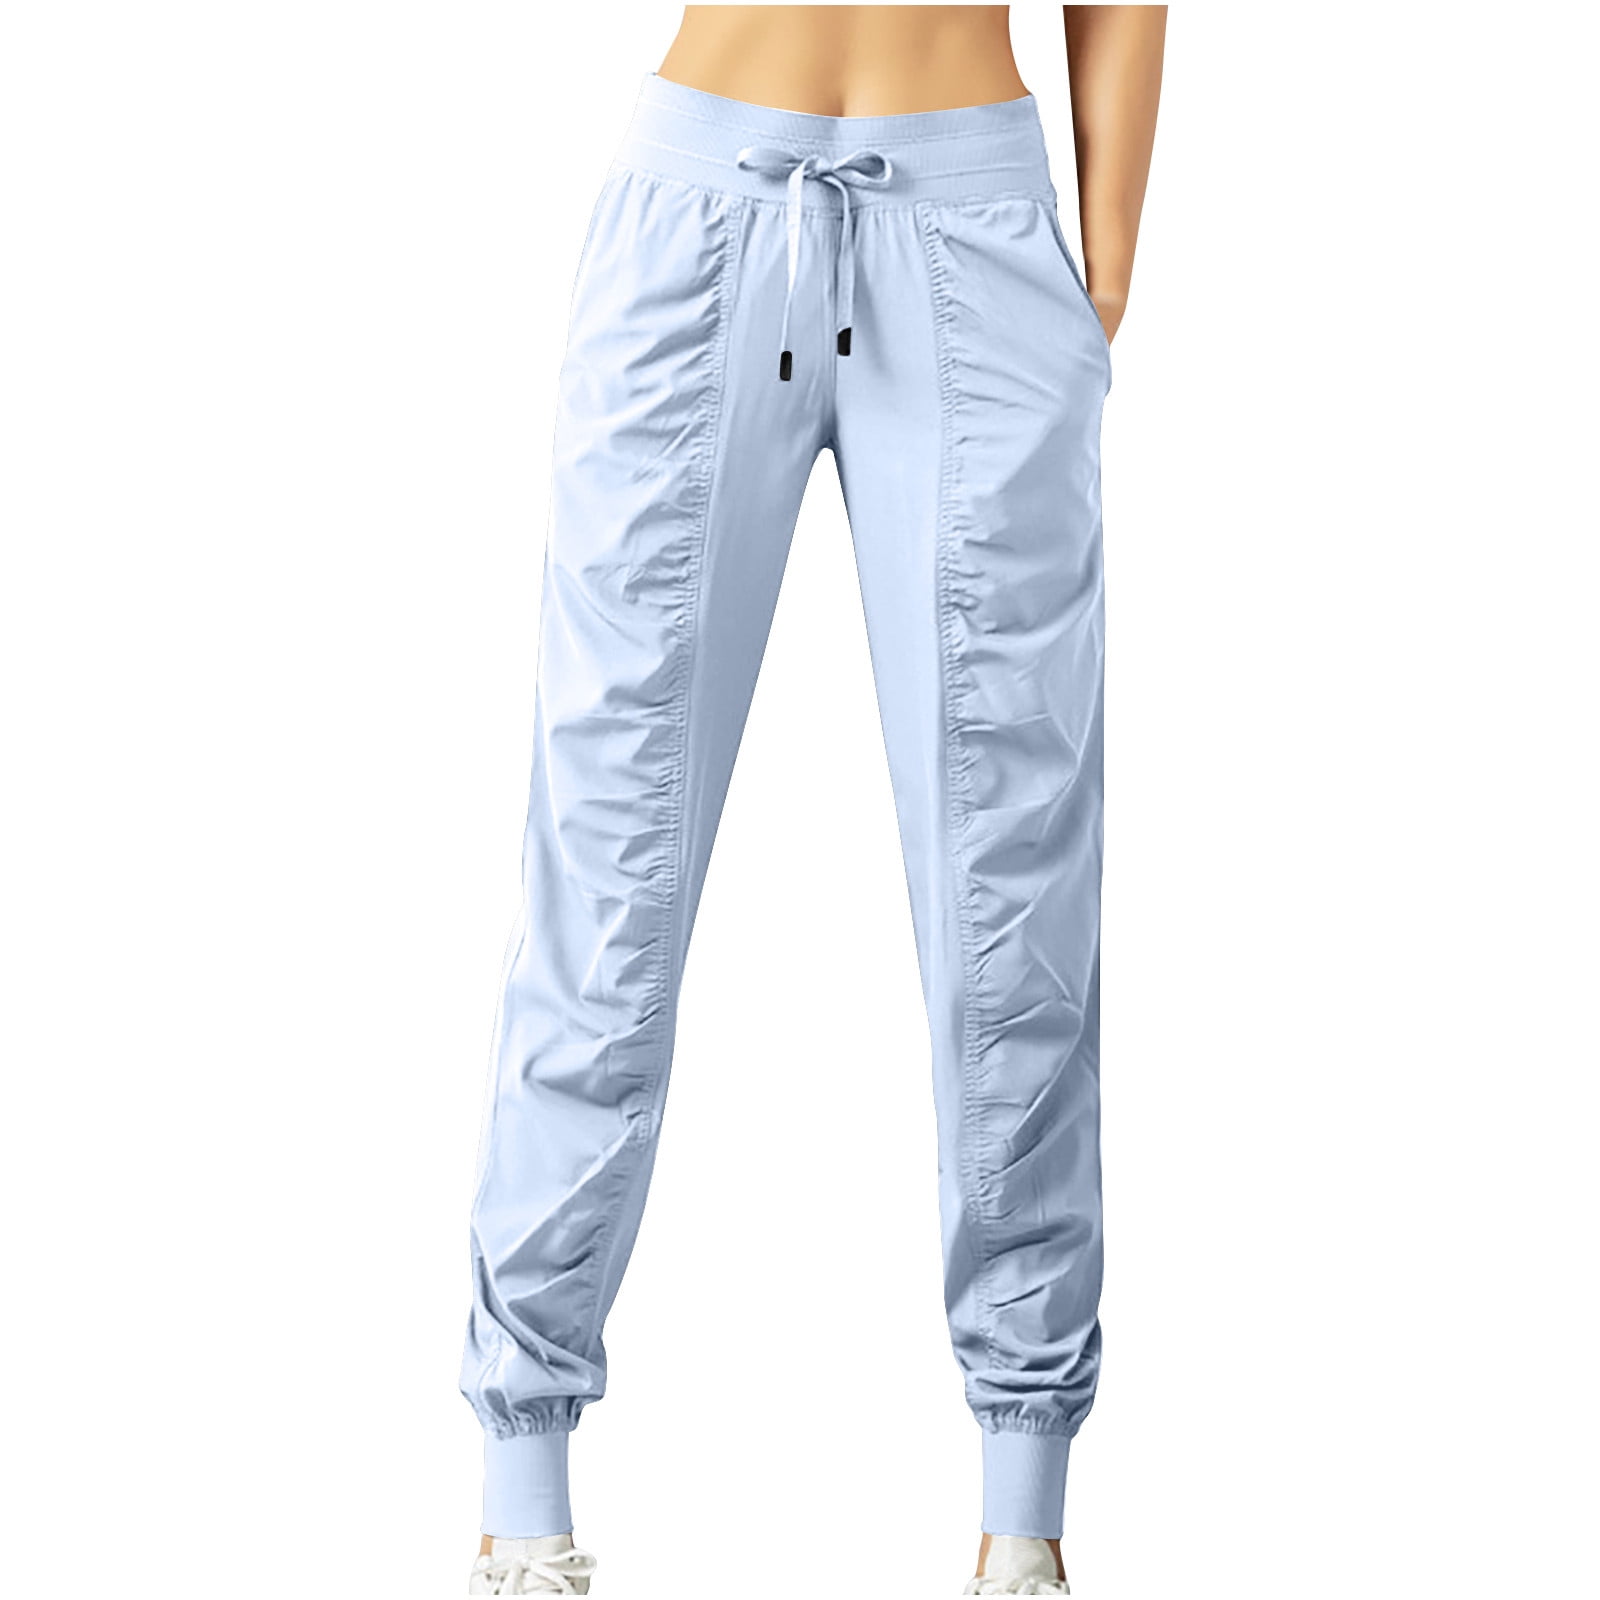 Women's Casual High Waistband Solid Color Harlan Pants Pants